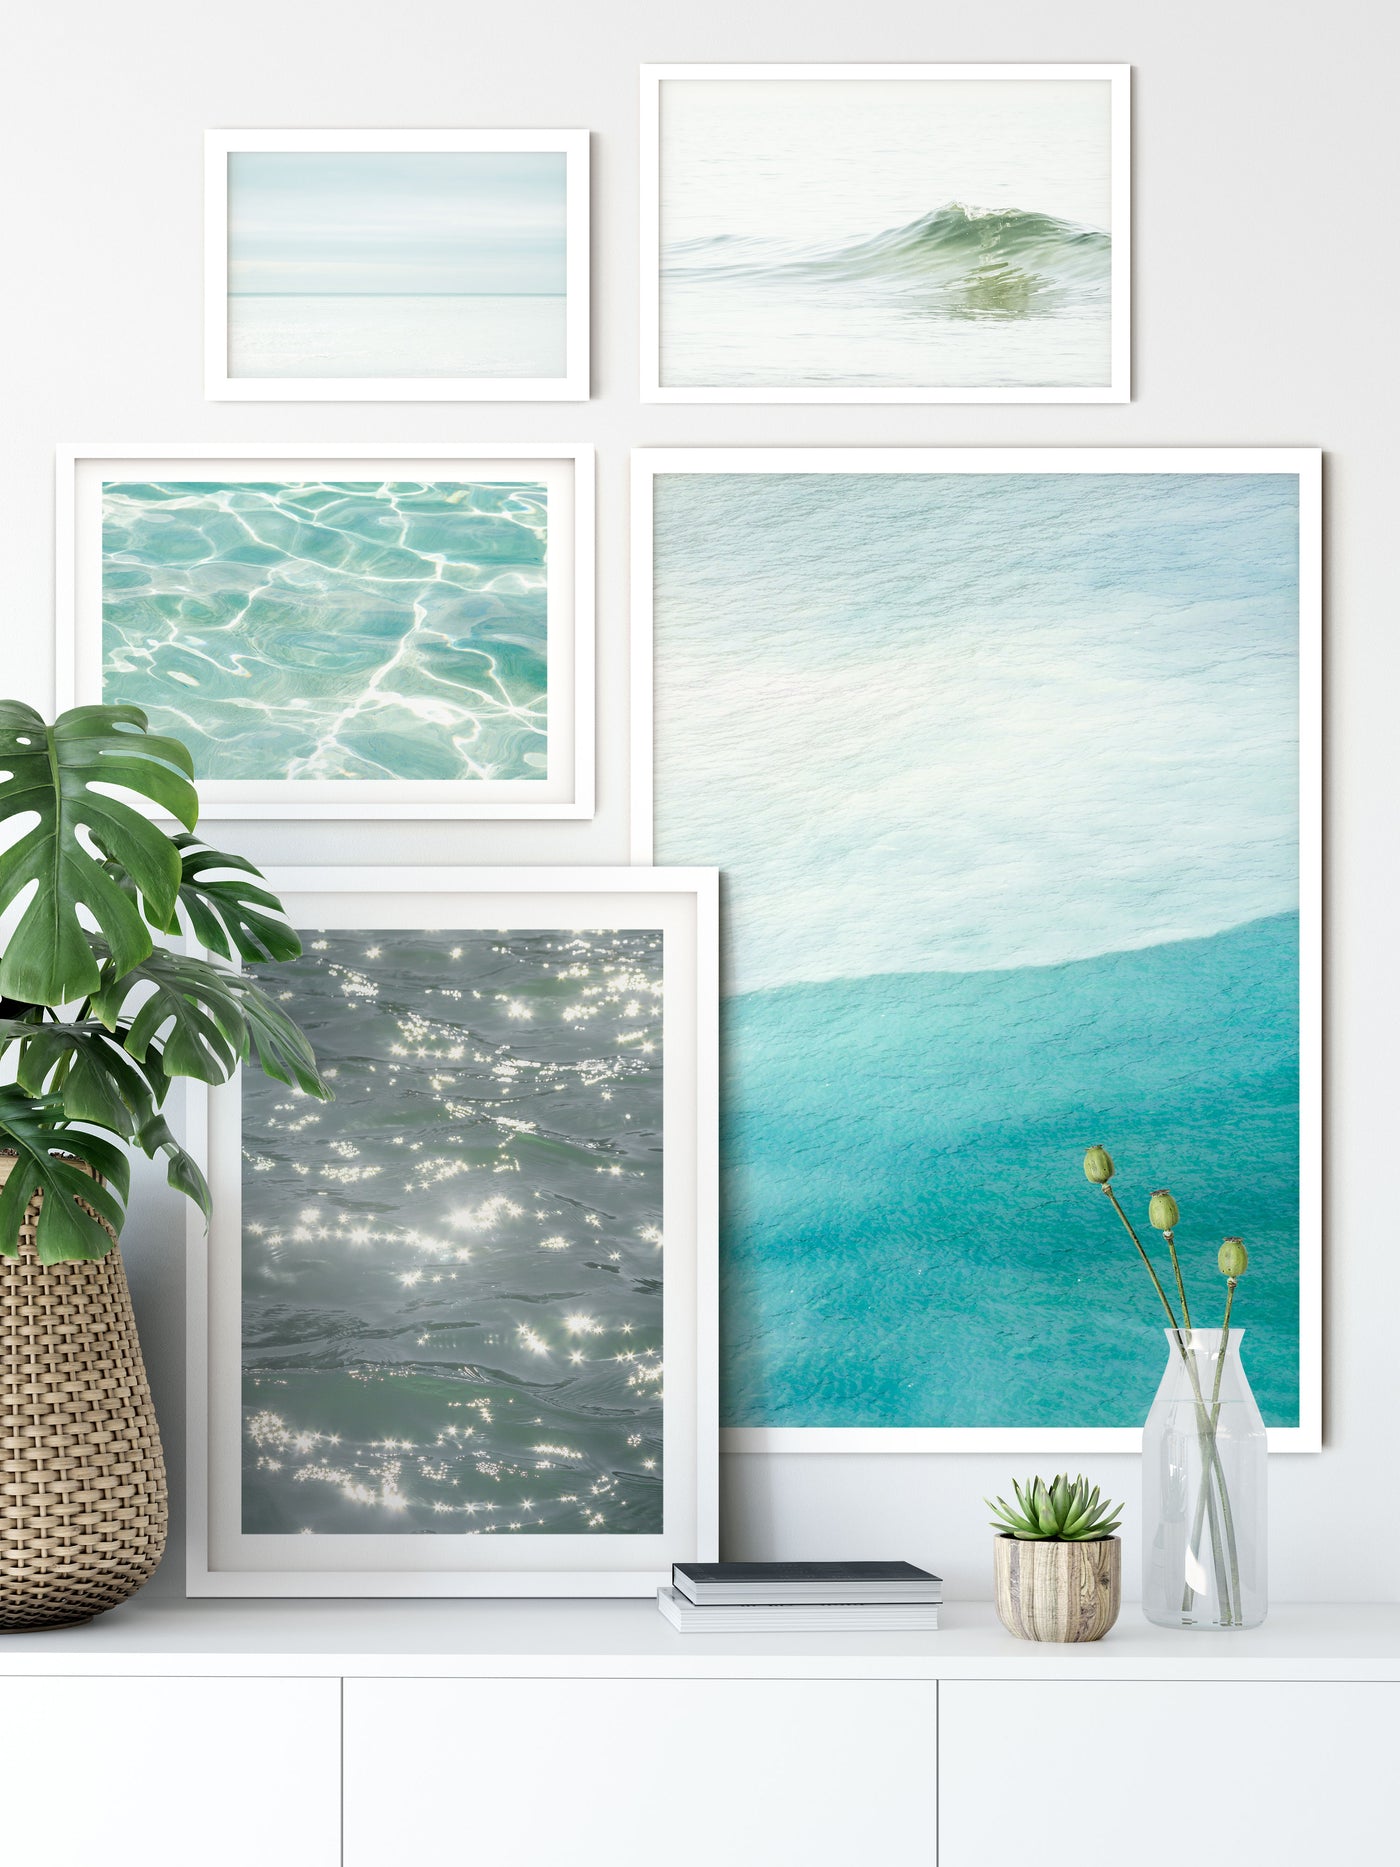 Ocean photography gallery wall set by Cattie Coyle